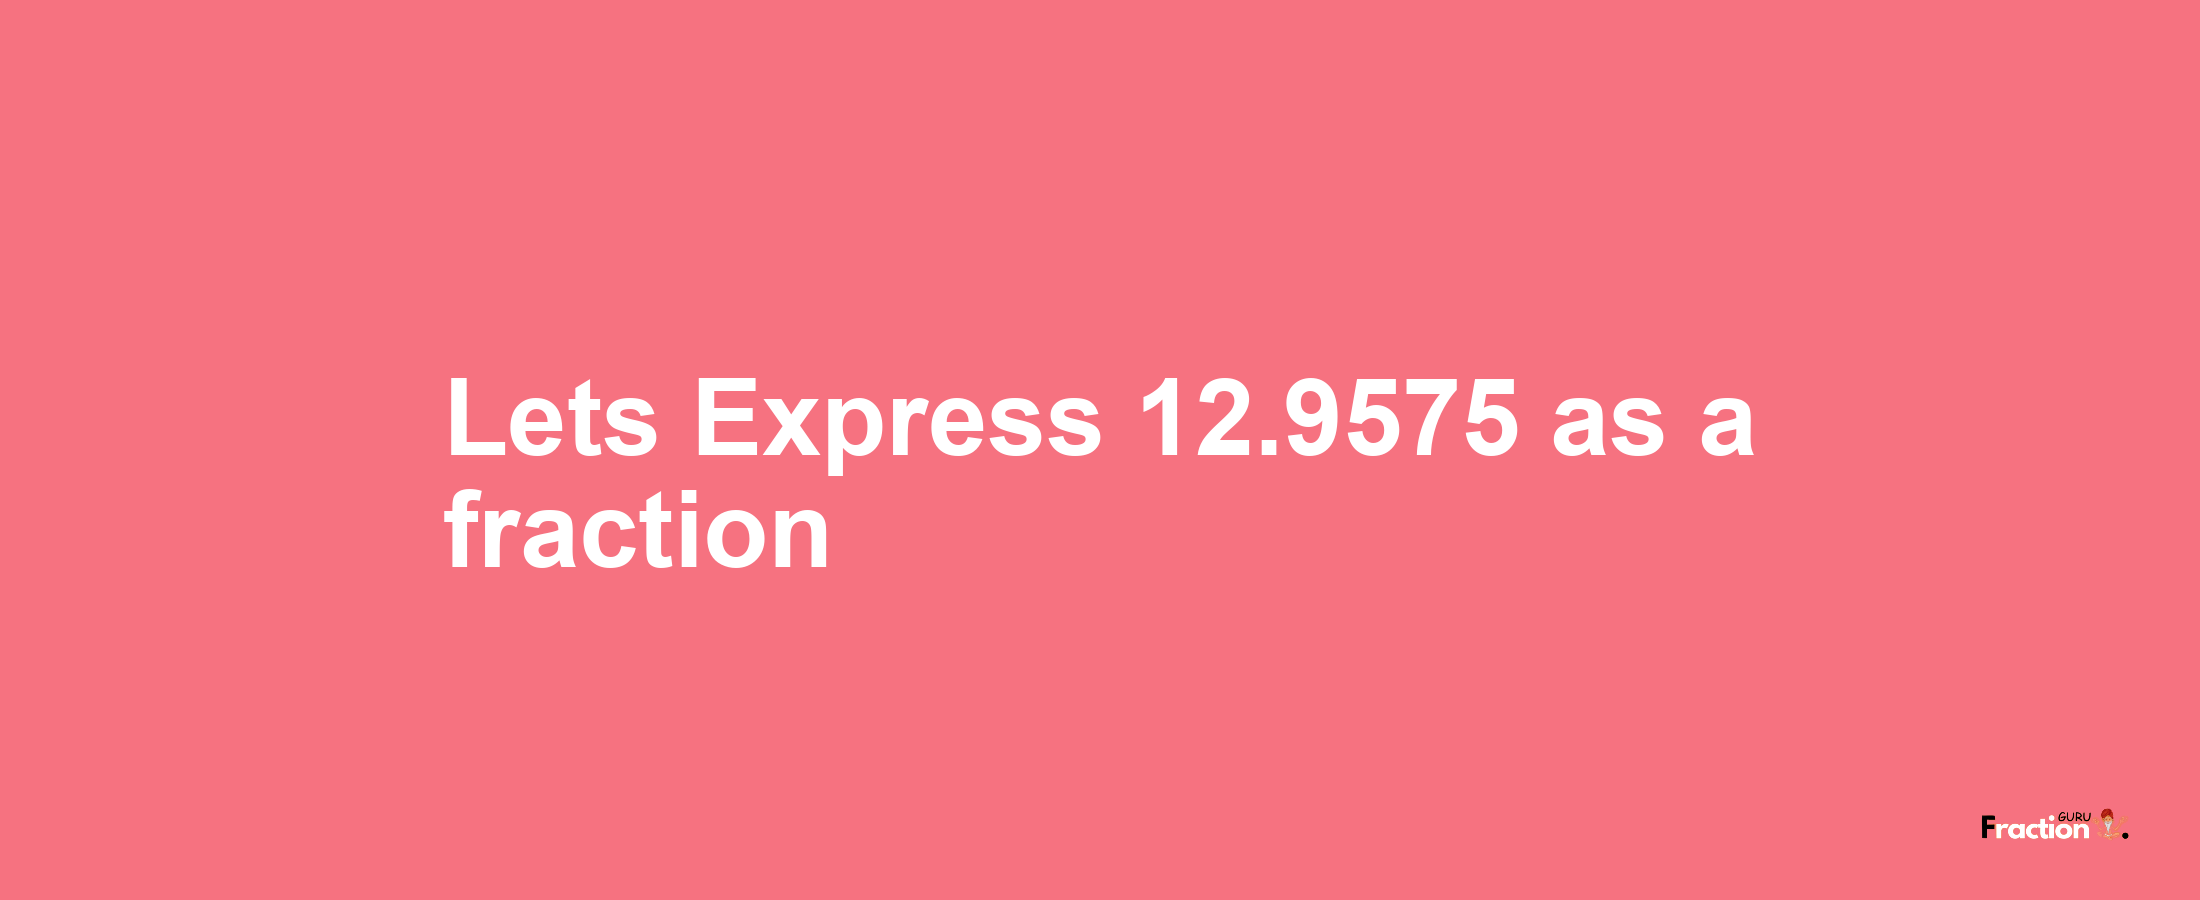 Lets Express 12.9575 as afraction